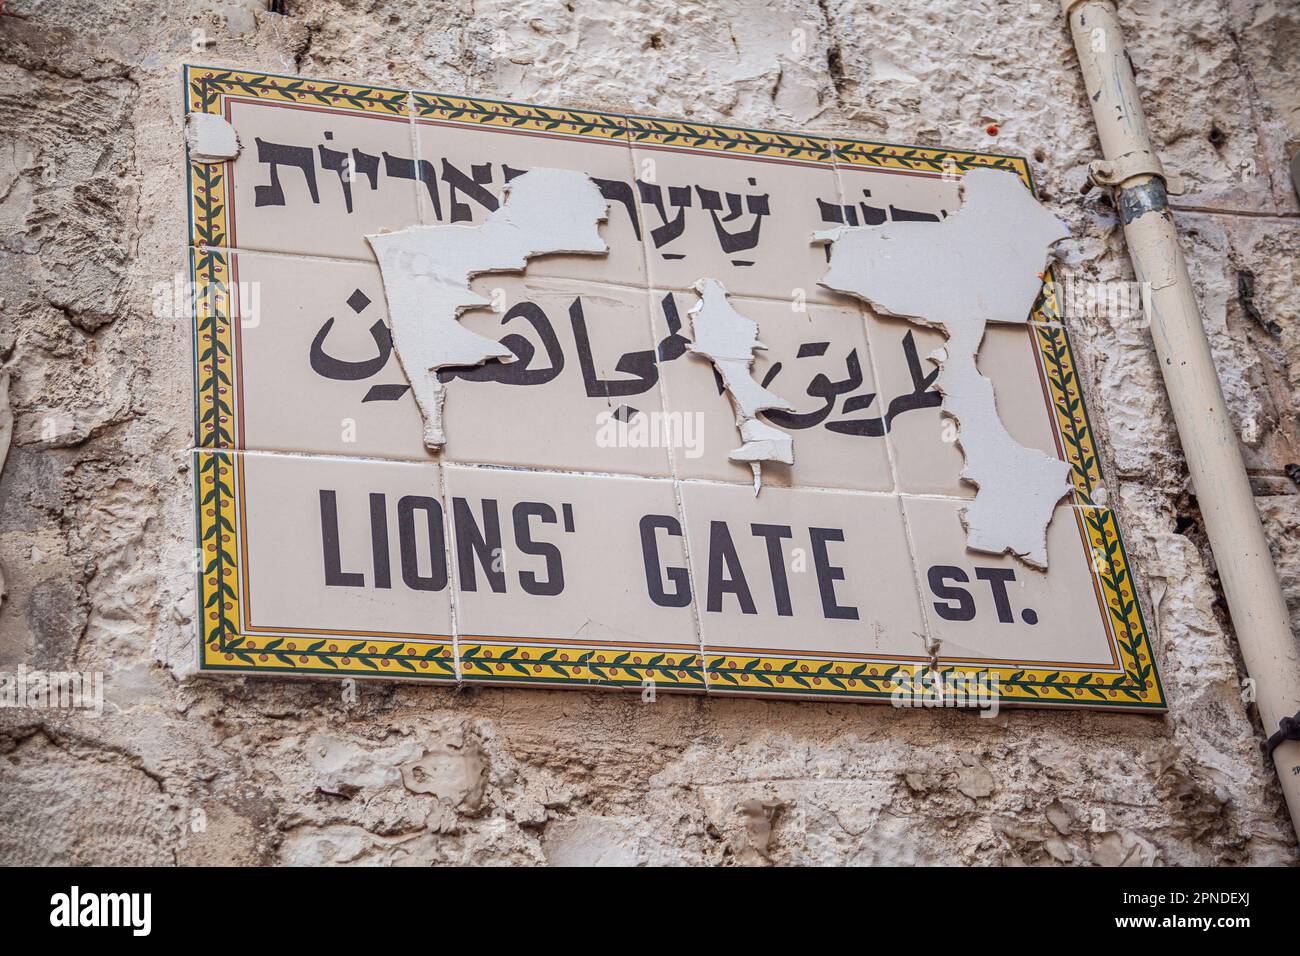 Lions Gate Street Sign Stock Photo